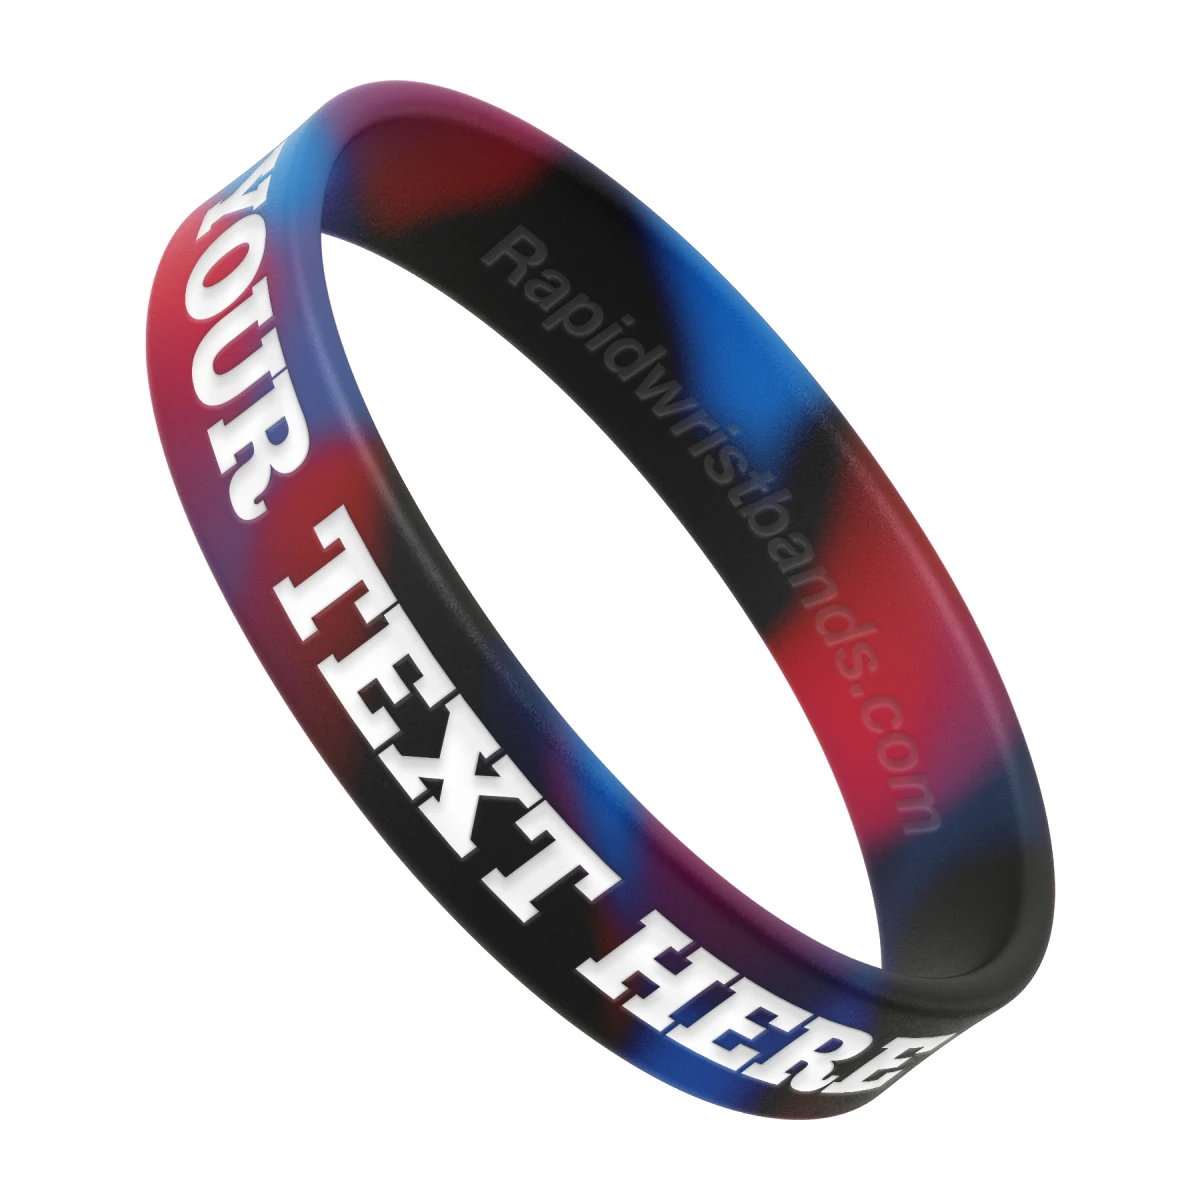 Swirl Red/Blue/Black Wristband With Your Text Here Engraved In White